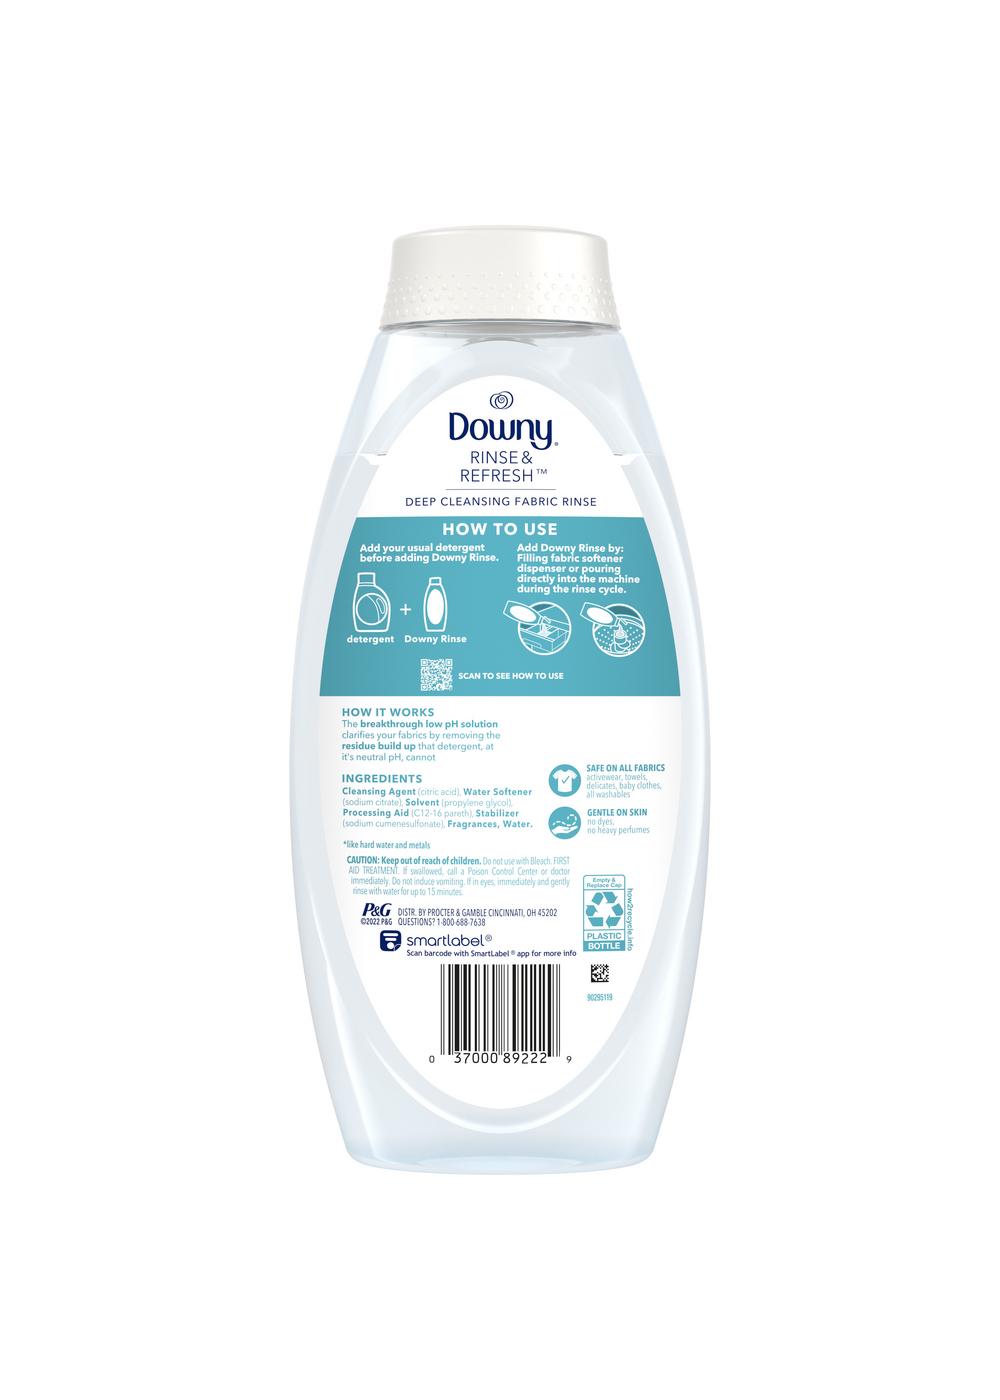 Downy Rinse & Refresh Laundry Odor Remover - Cool Cotton; image 10 of 10